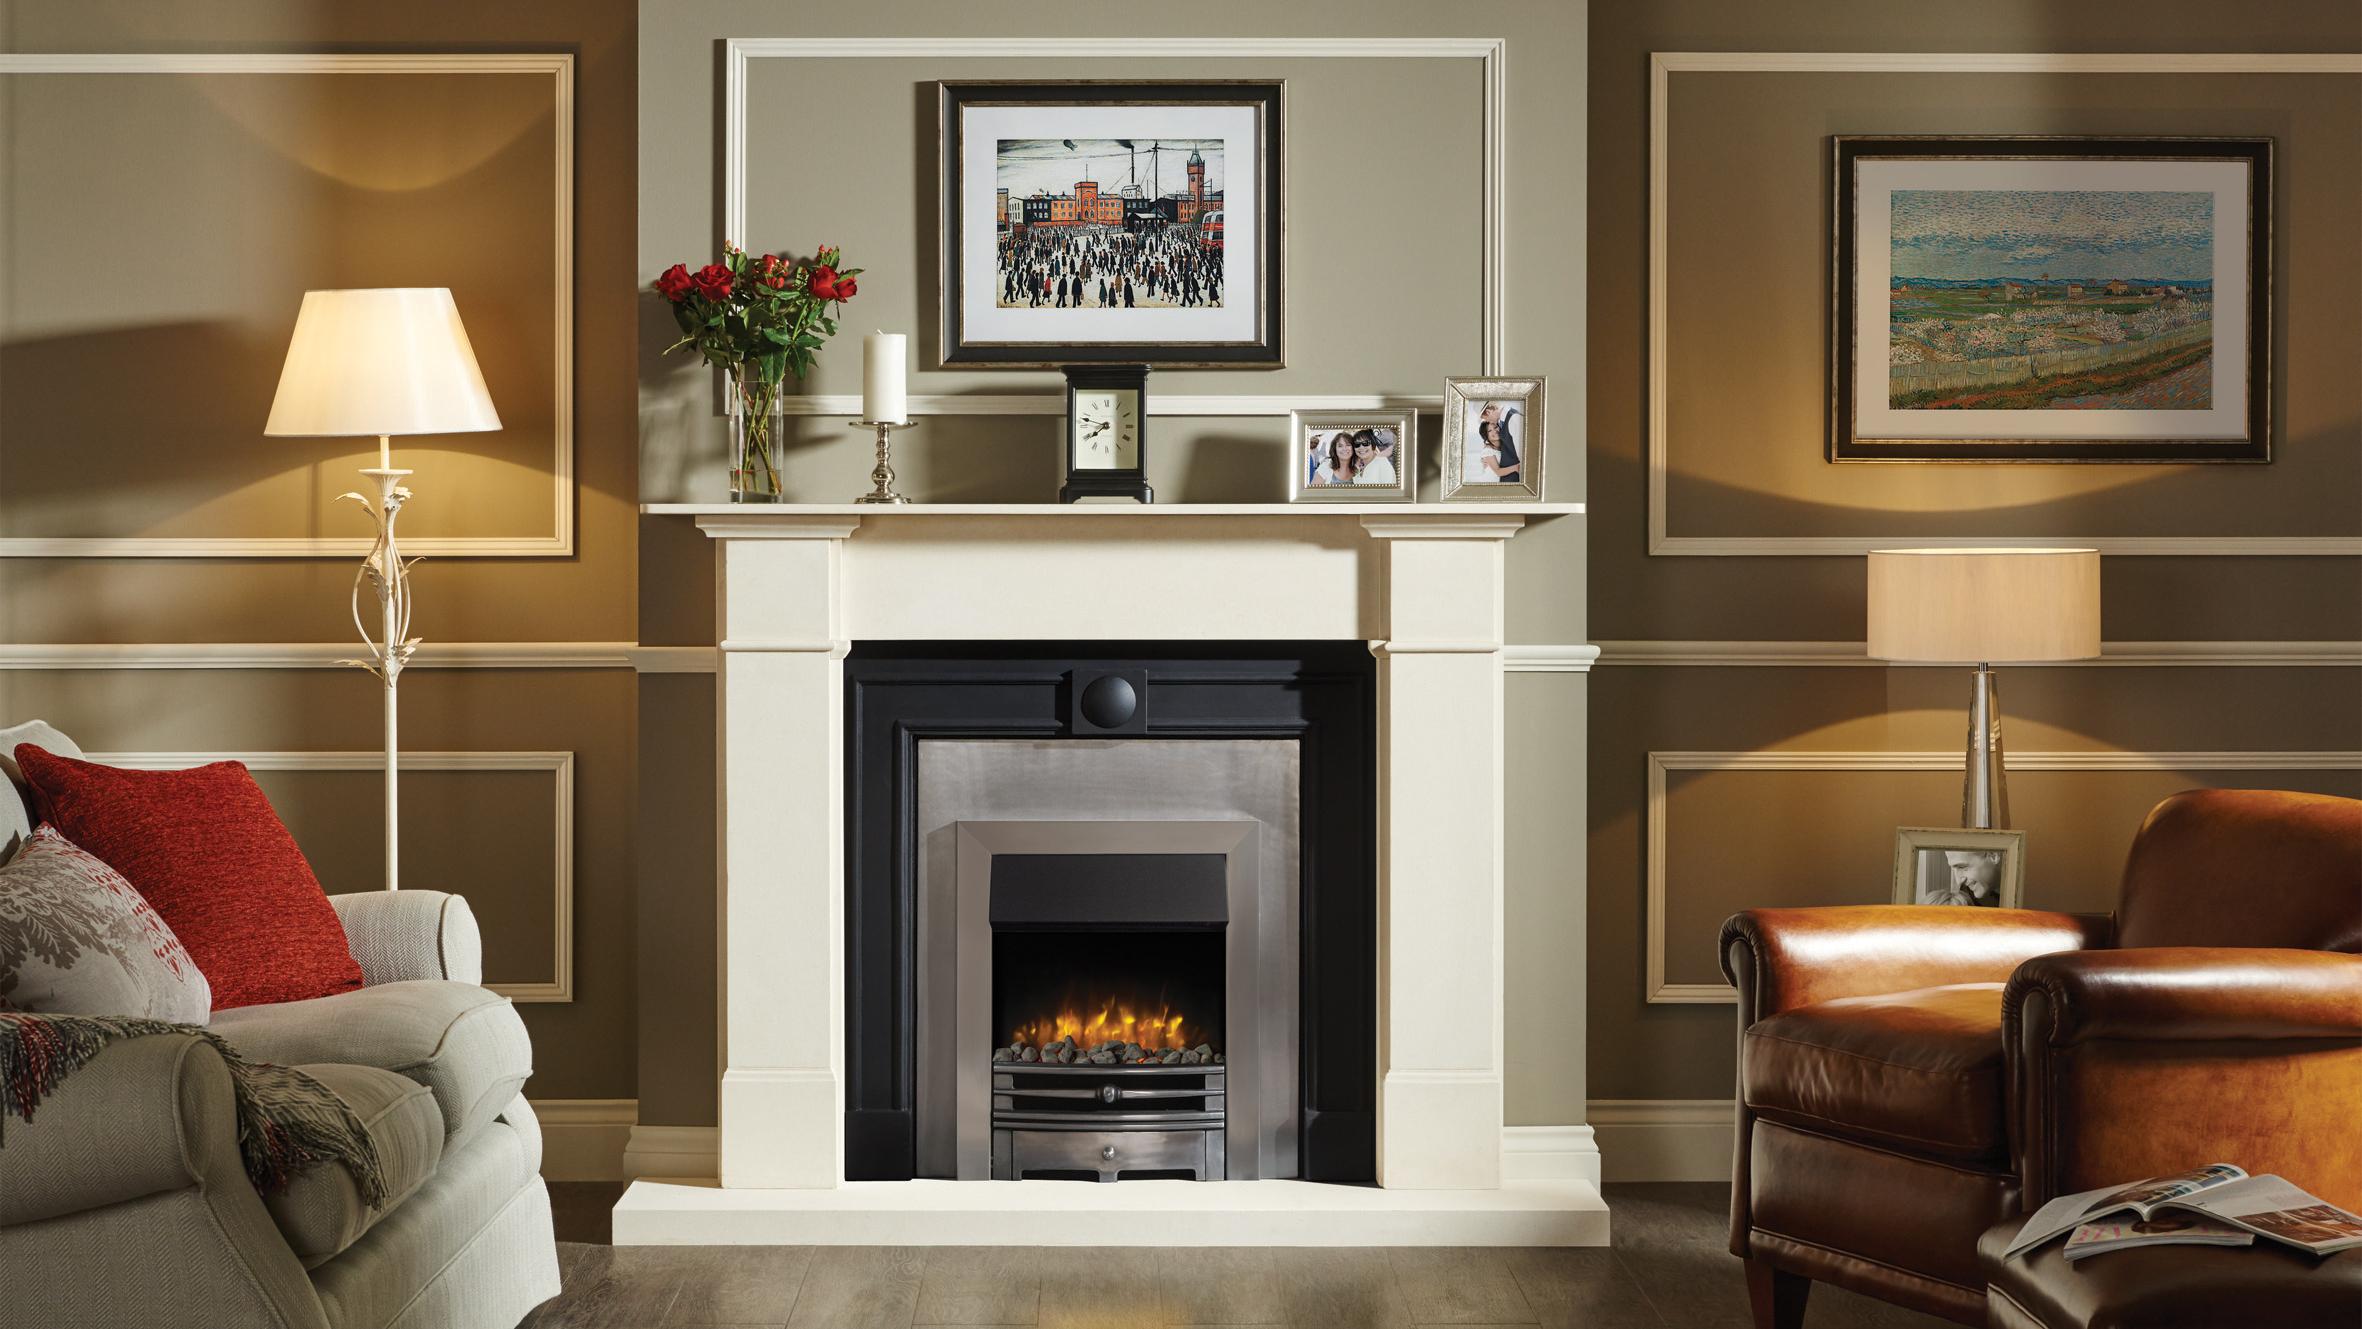  Traditional Electric Fireplaces